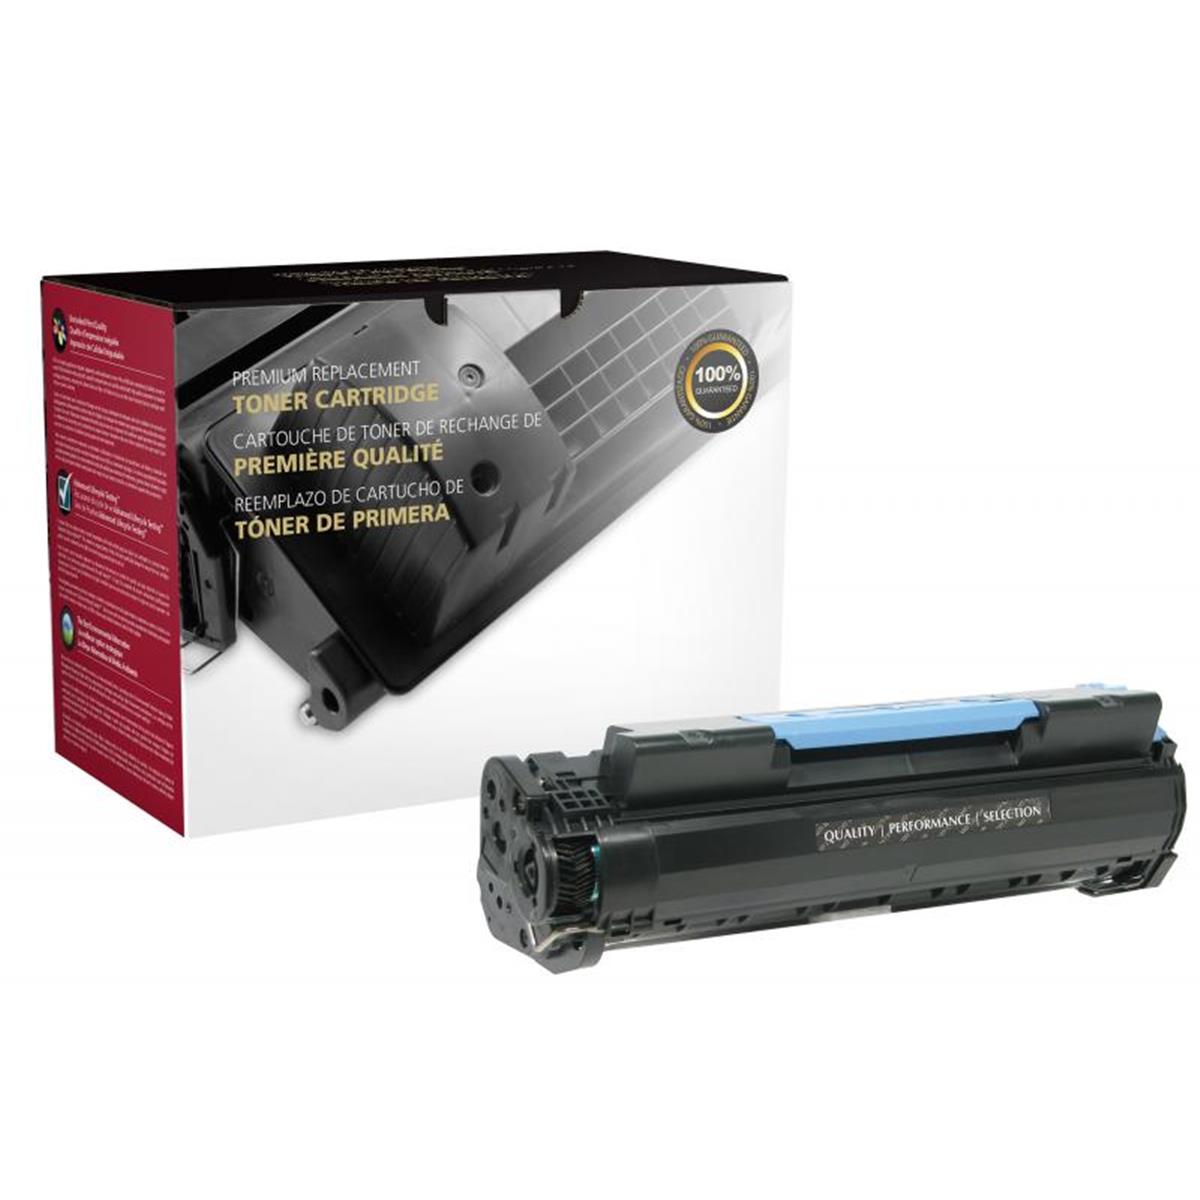 Picture of Canon 200099 Universal Toner Cartridge for Canon 0264B001AA & 1153B001AA-106 & FX11